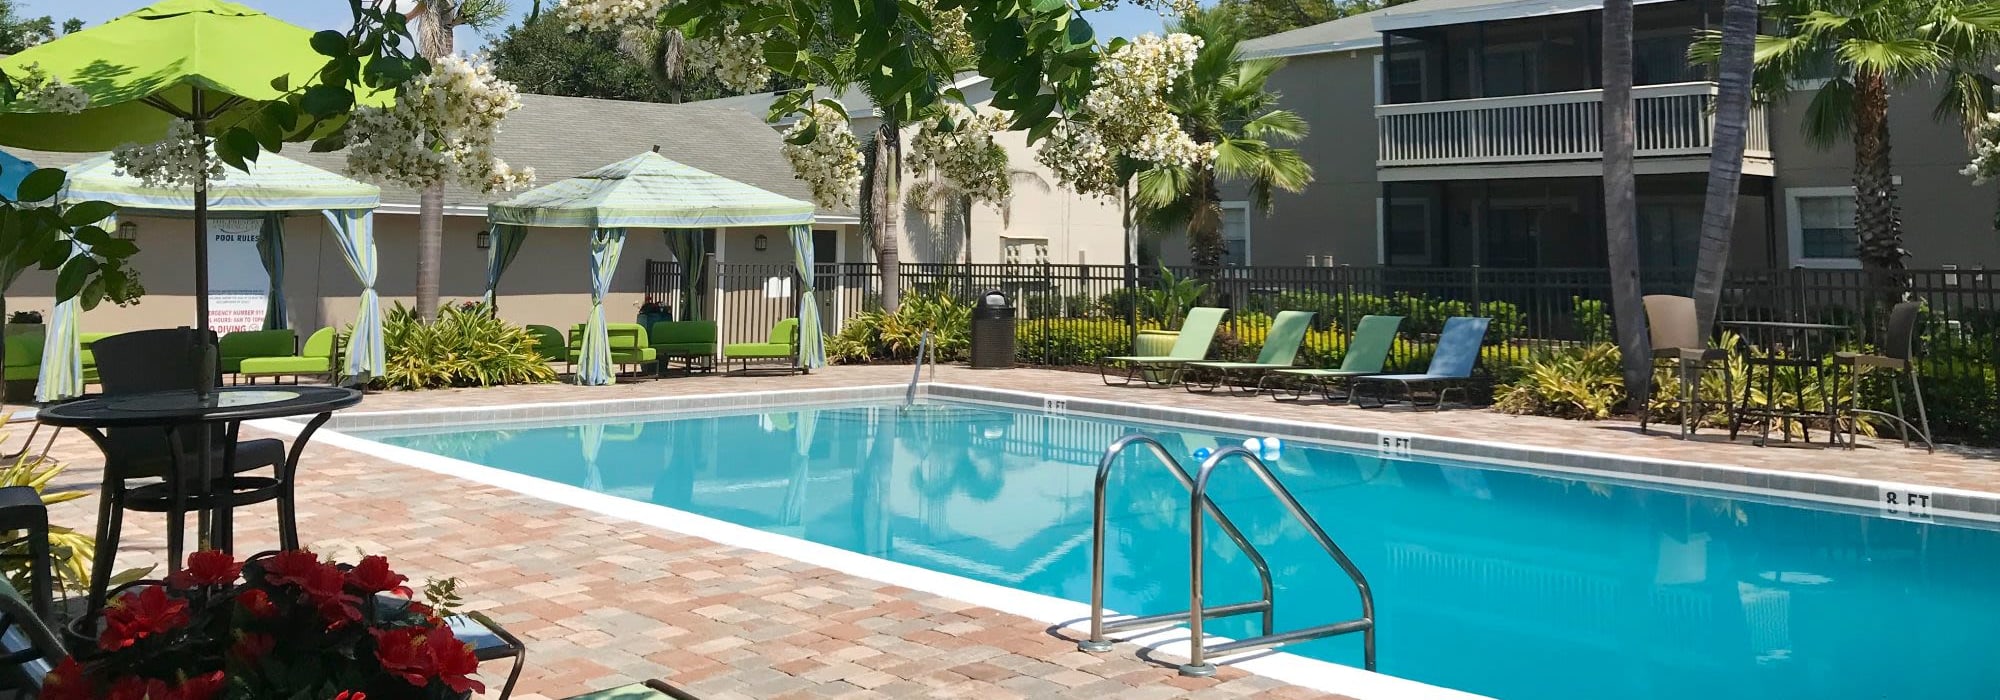 Schedule a Tour at The Preserve at Spring Lake in Altamonte Springs, Florida